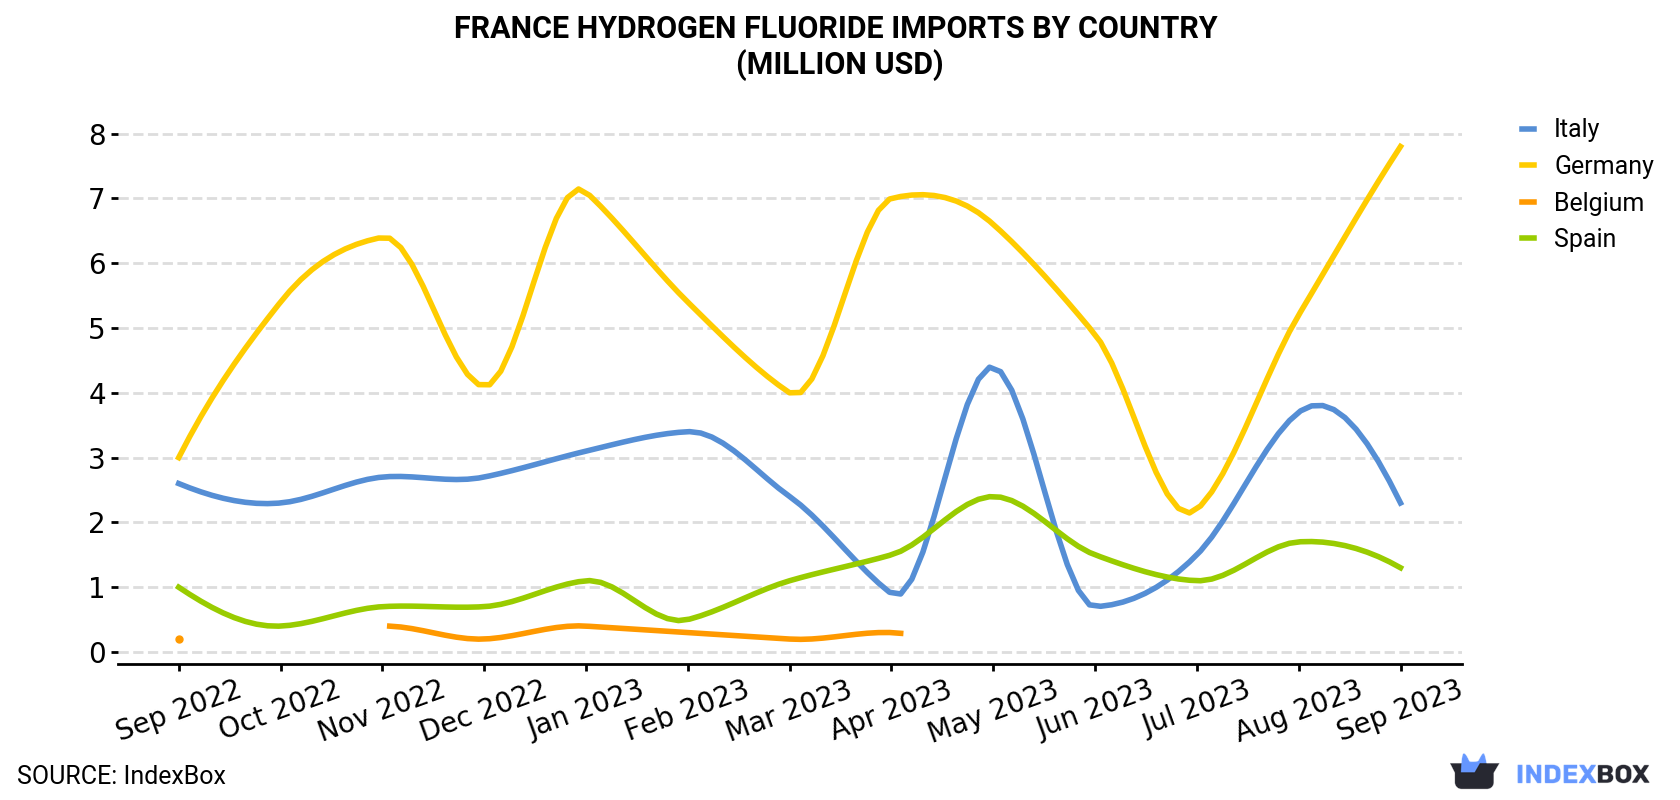 France Hydrogen Fluoride Imports By Country (Million USD)